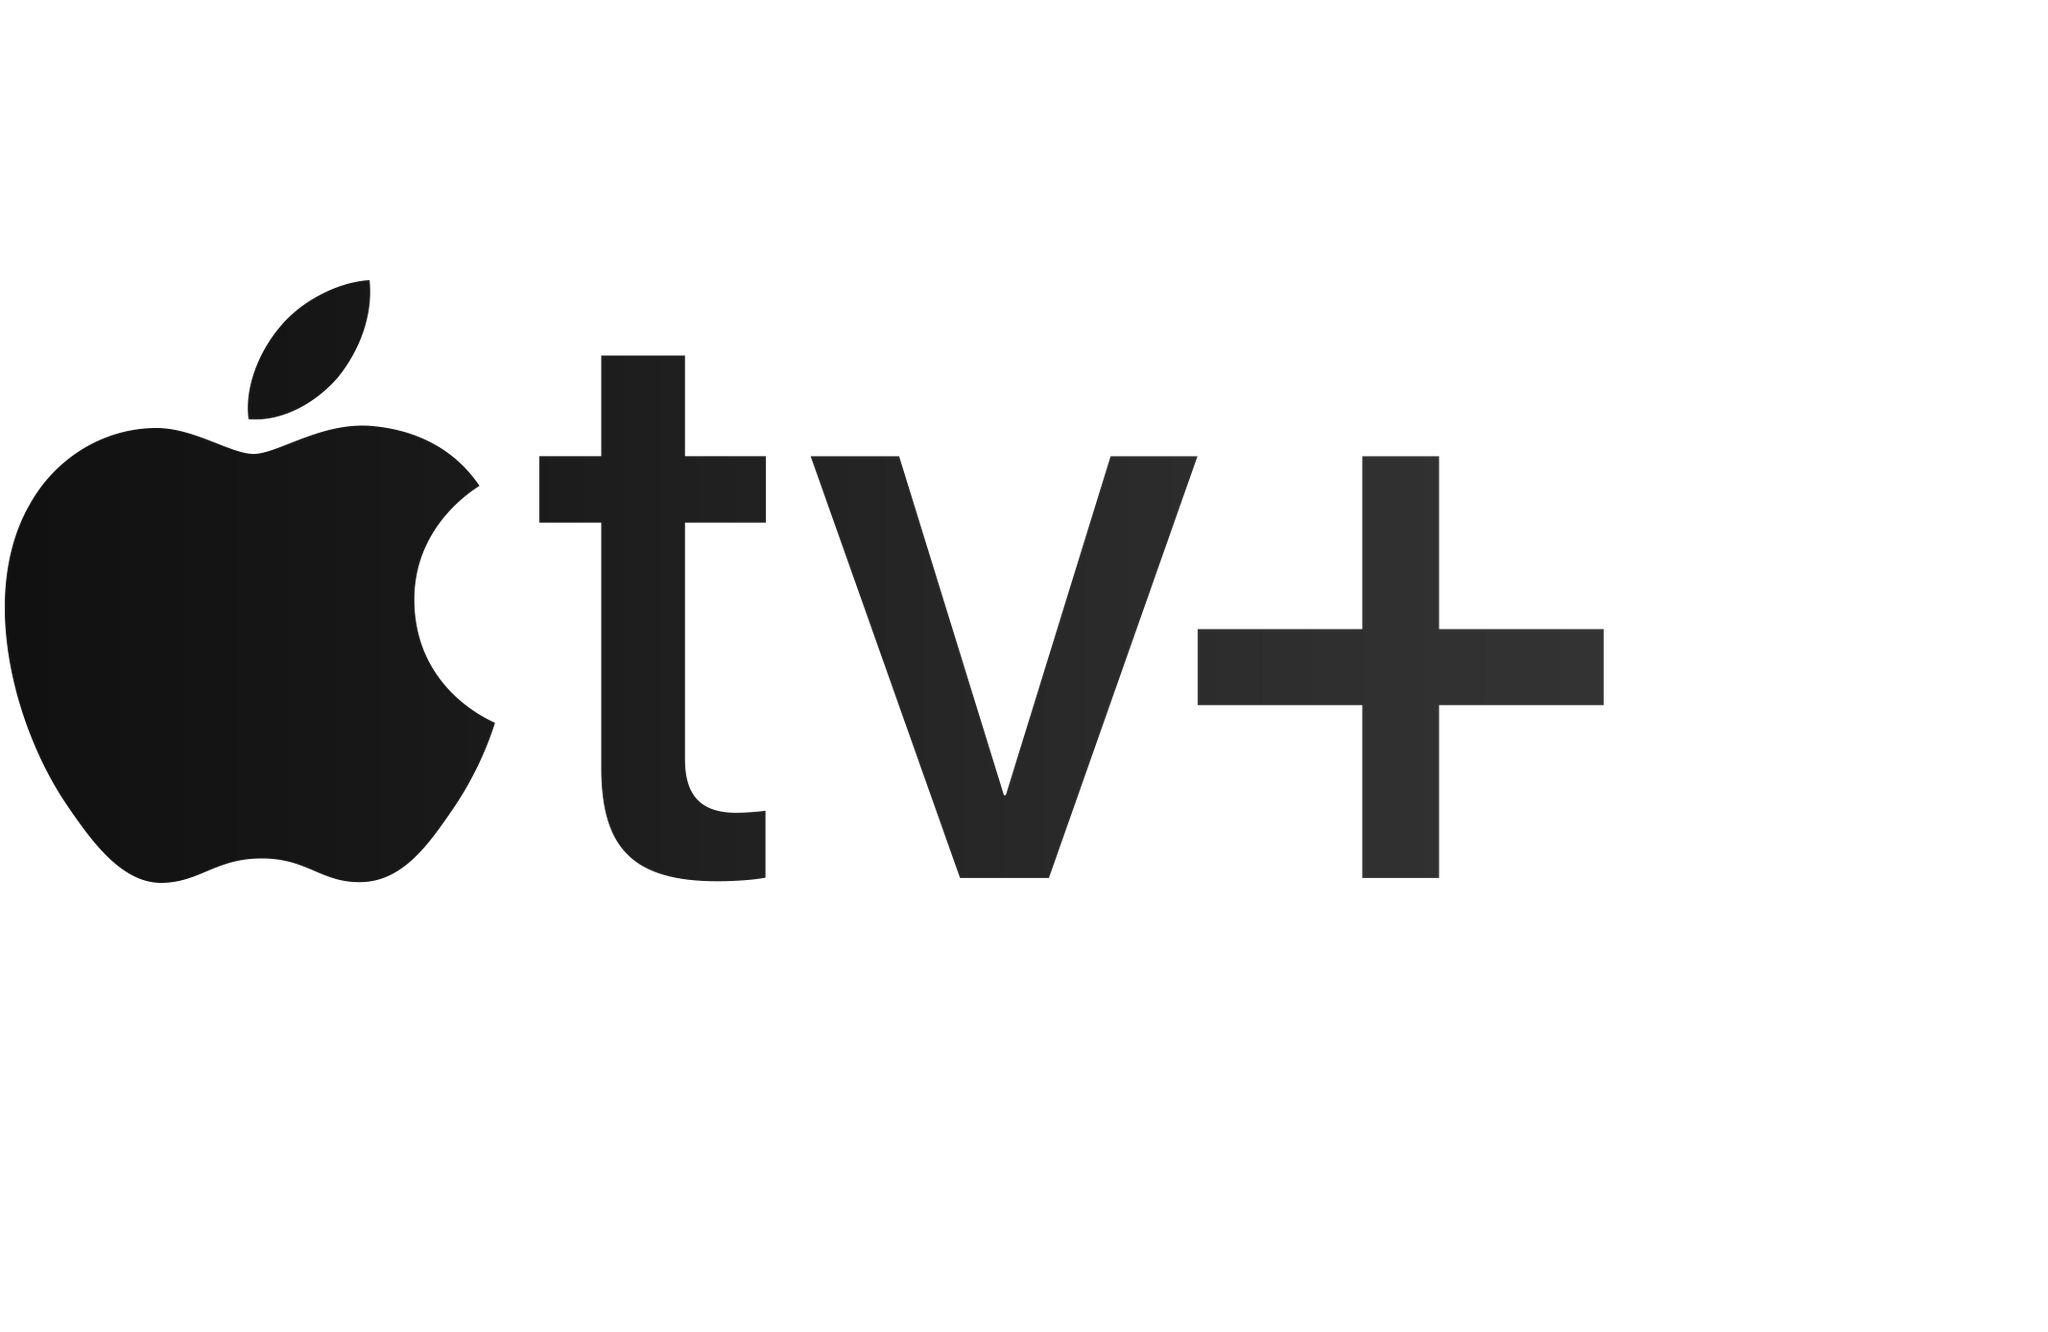 Apple TV+ Launches on November 1st: What you need to know